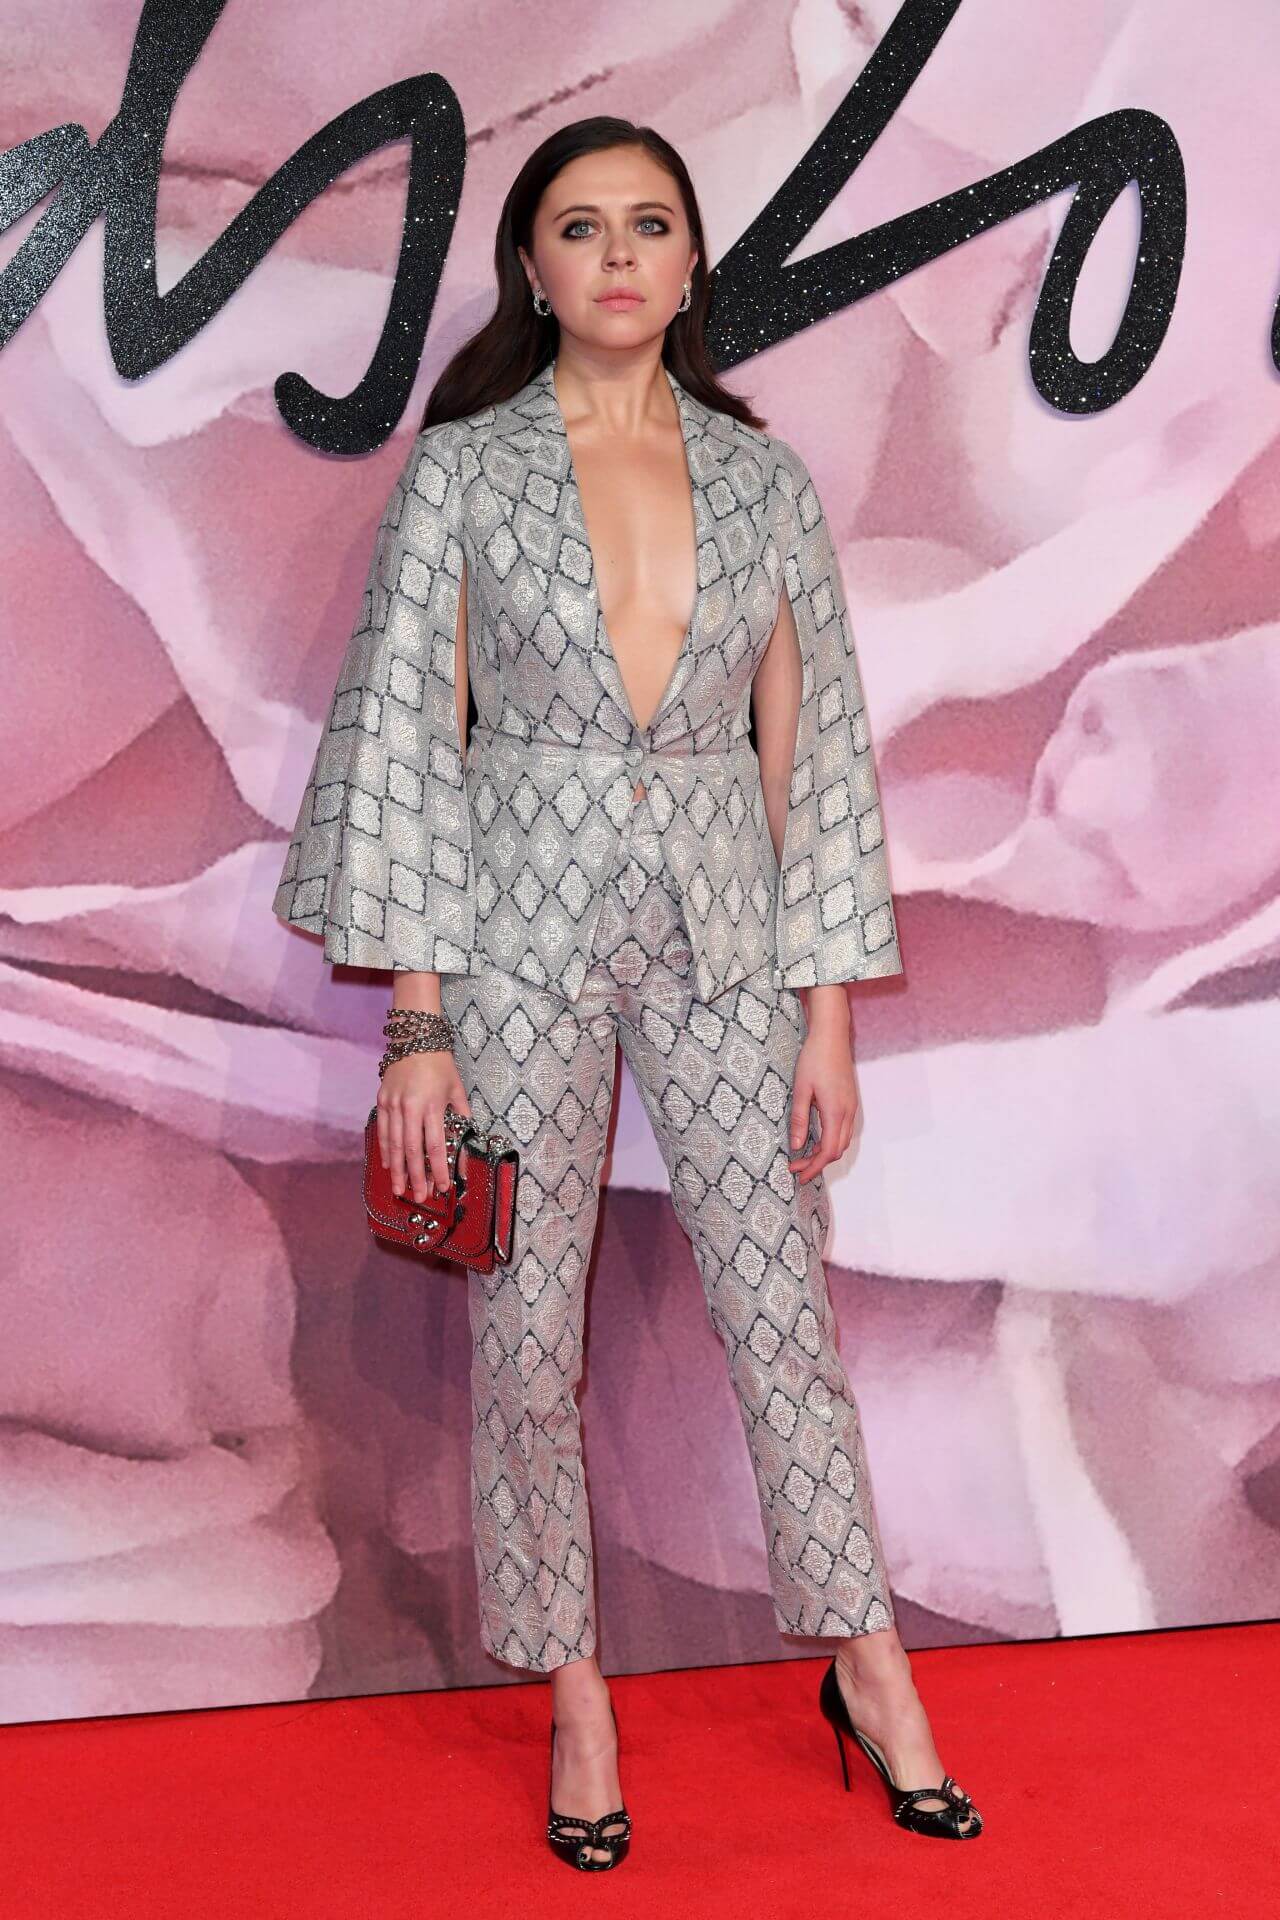 Bel Powley In Grey Printed V Neckline Long Flare Jacket With Pants At The Fashion Awards in London, UK